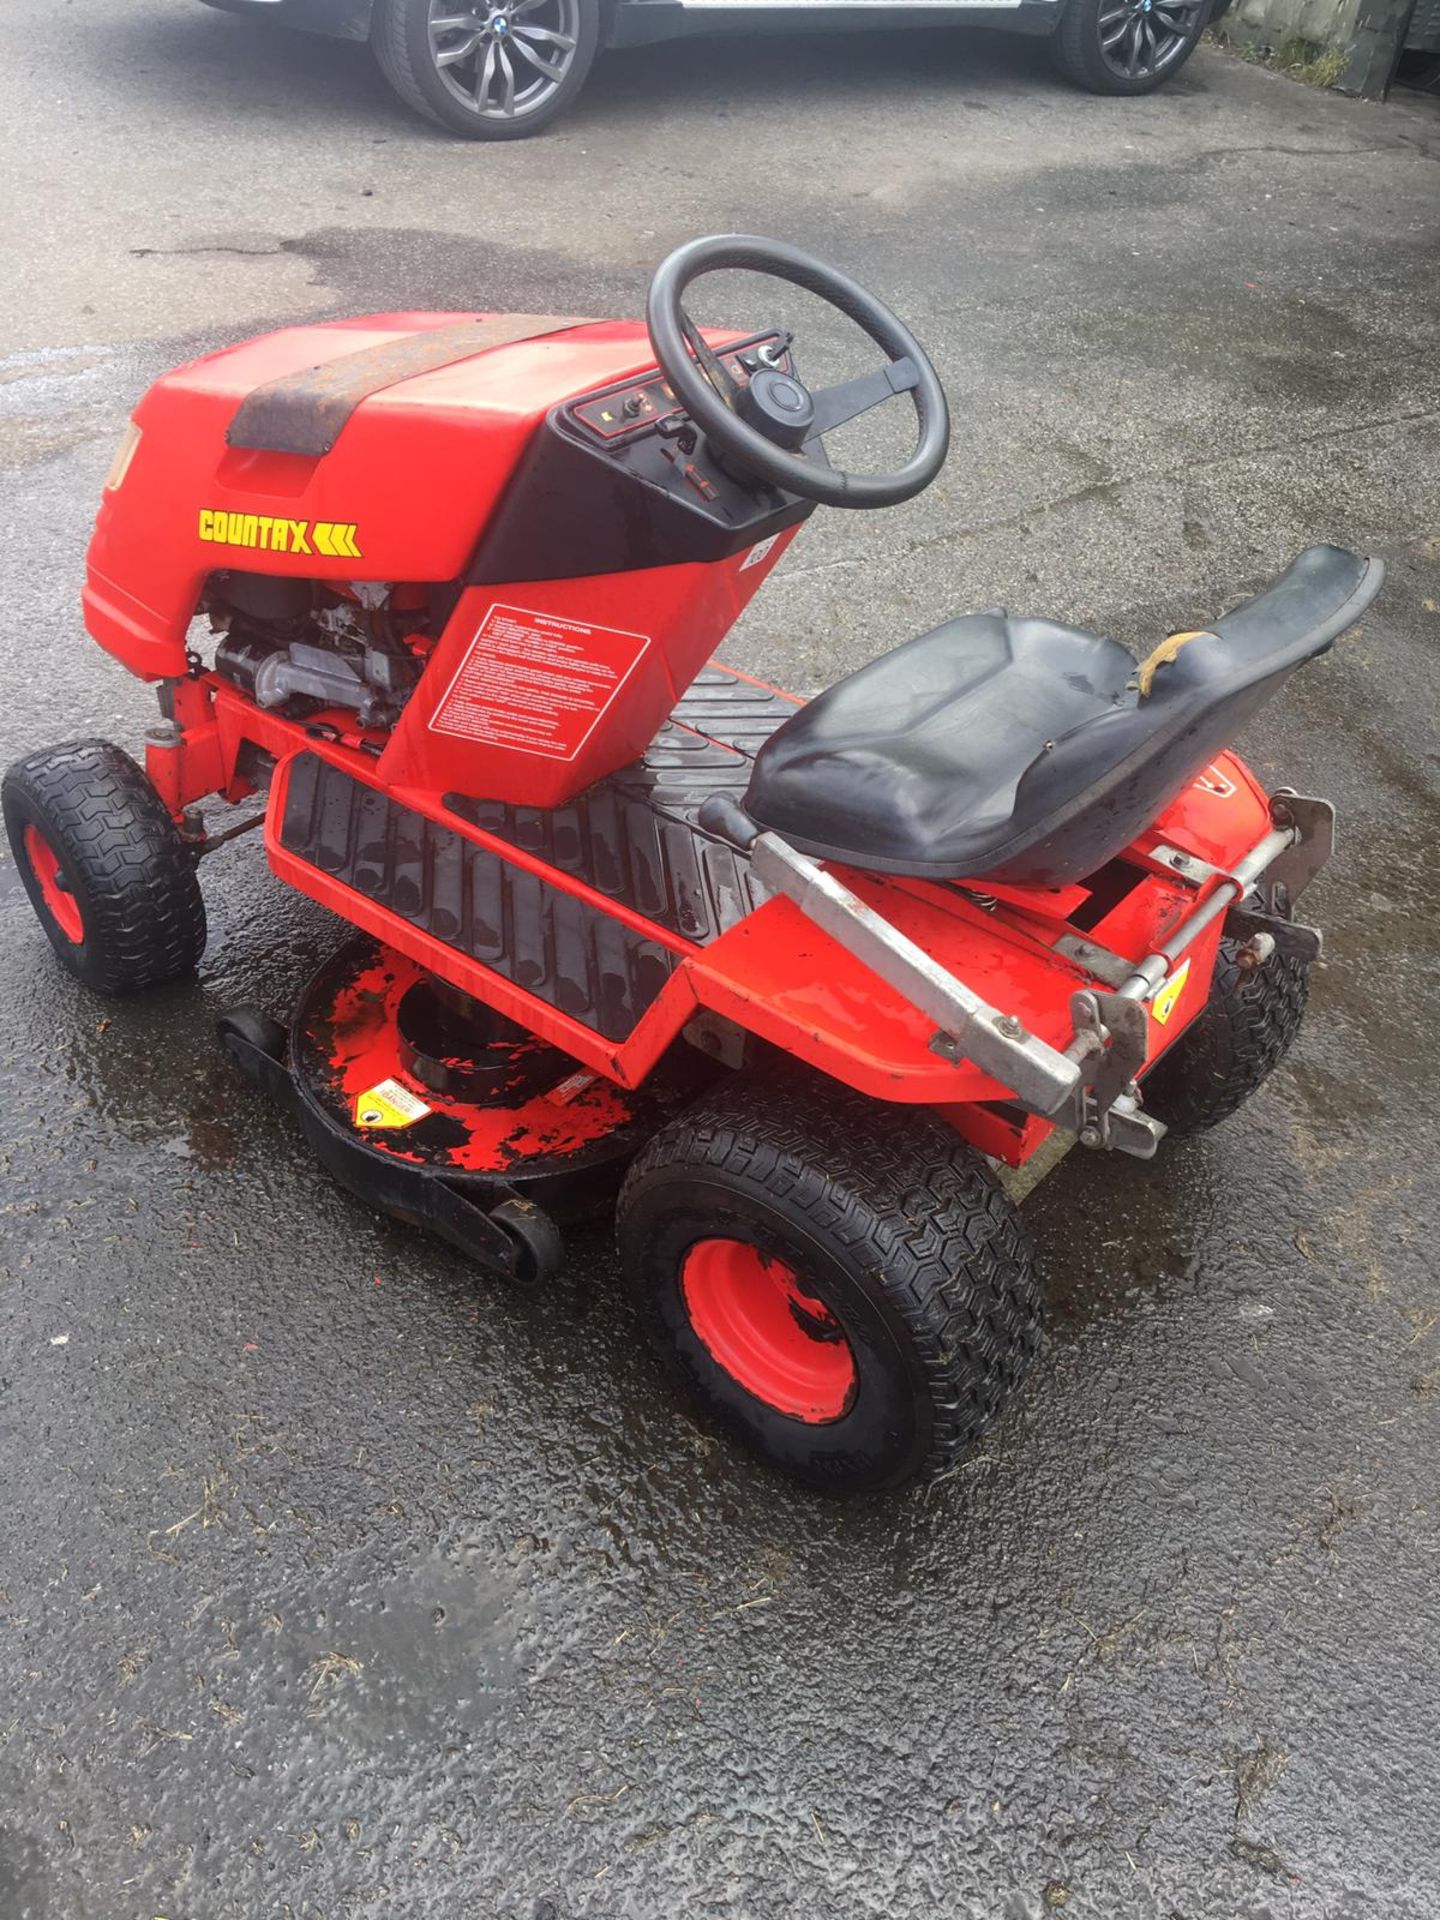 COUNTAX K14 RIDE ON LAWN MOWER, VANGUARD 14HP ENGINE, STARTS, RUNS AND DRIVES *NO VAT* - Image 4 of 12